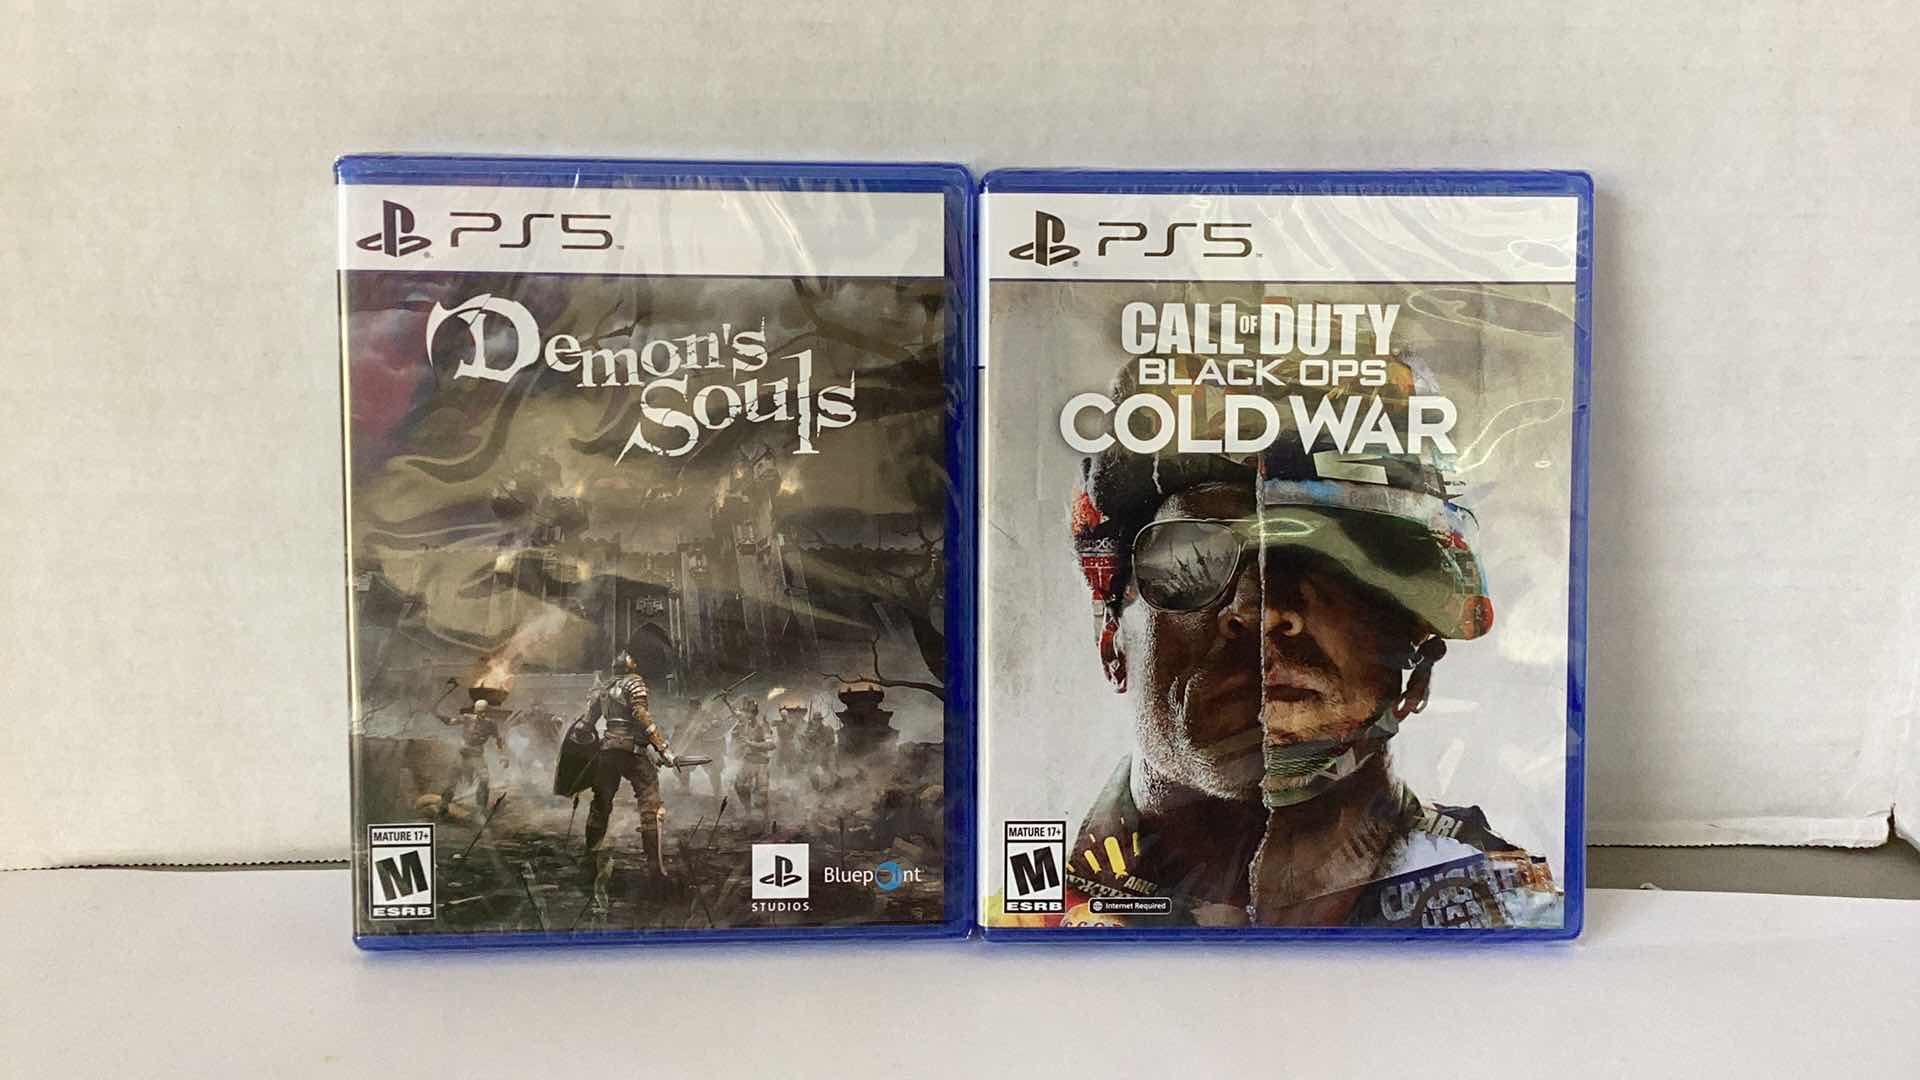 Photo 1 of 2 NEW PS5 GAMES: DEMON'S SOULS AND CALL OF DUTY BLACK OPS COLD WAR